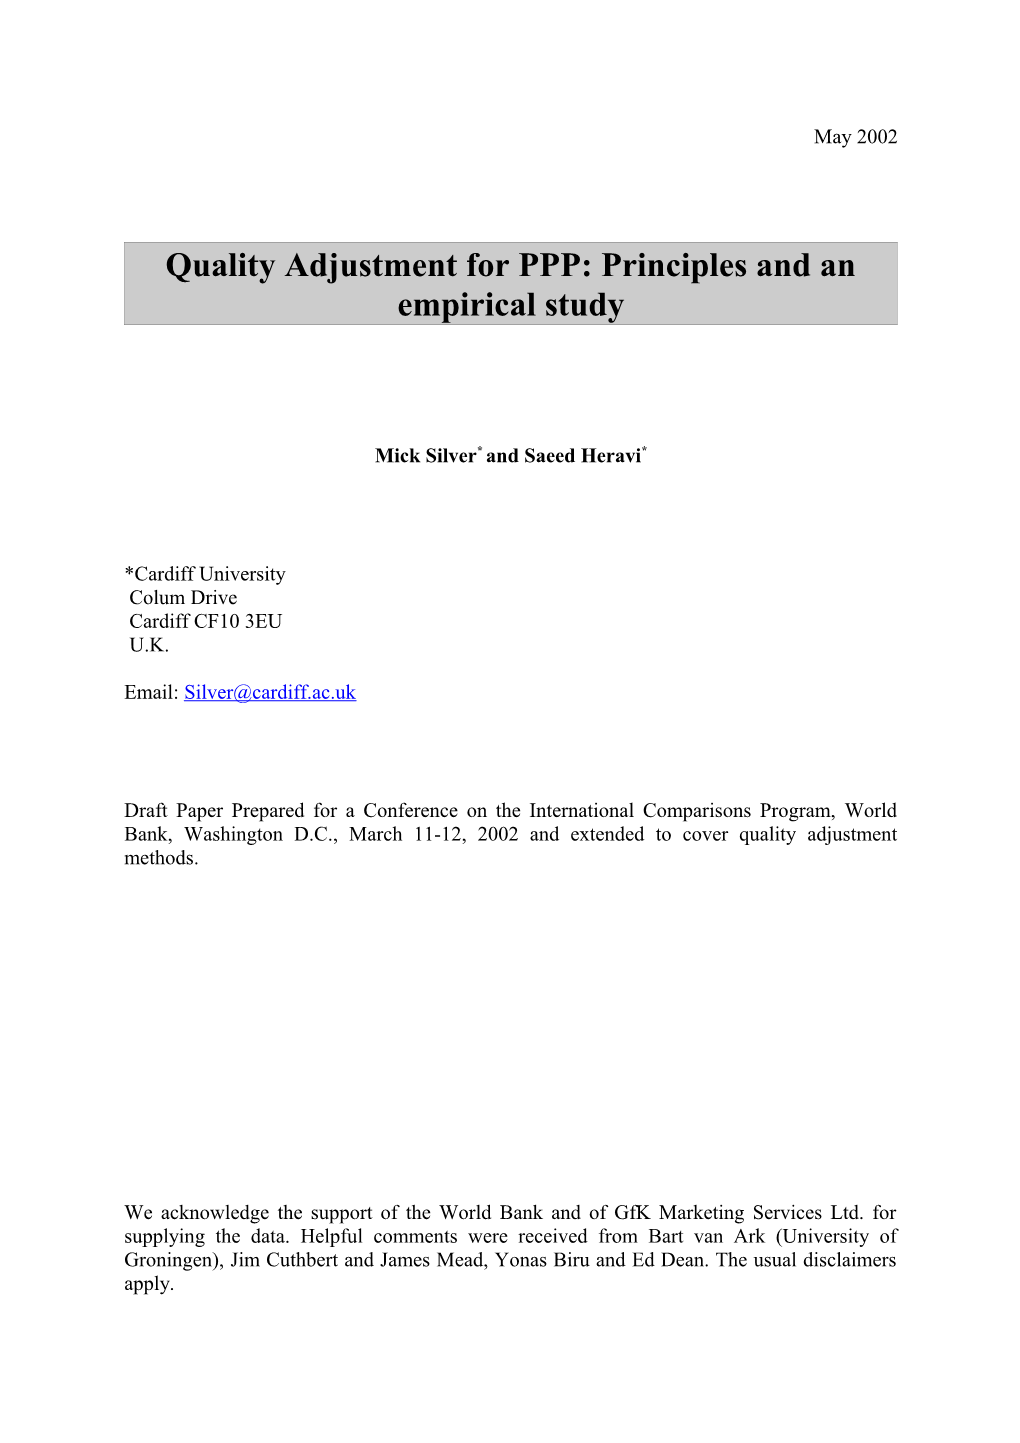 Quality Adjustment for PPP: Principles and an Empirical Study